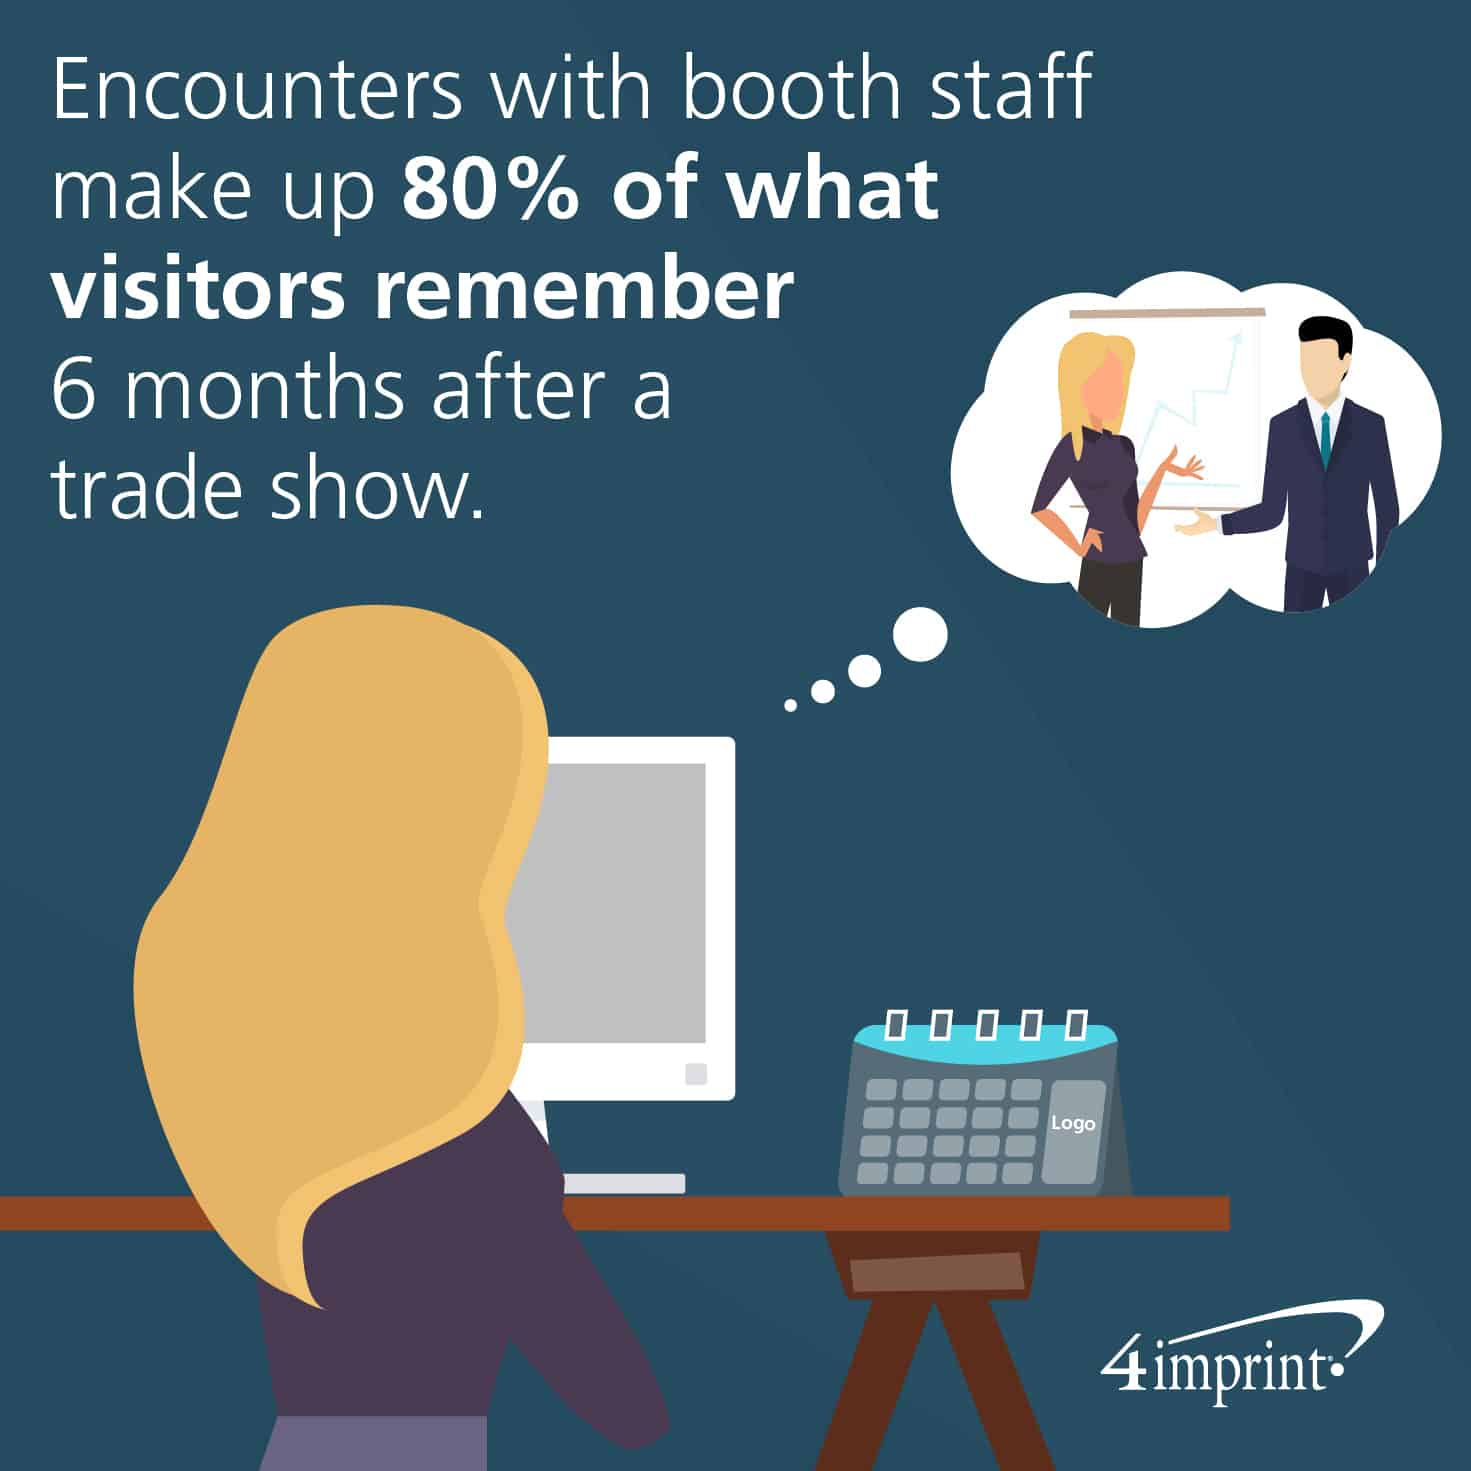 Encounters with booth staff make up 80% of what visitors remember 6 months after a trade show. Get ideas for trade show giveaways to help make those interactions more memorable.